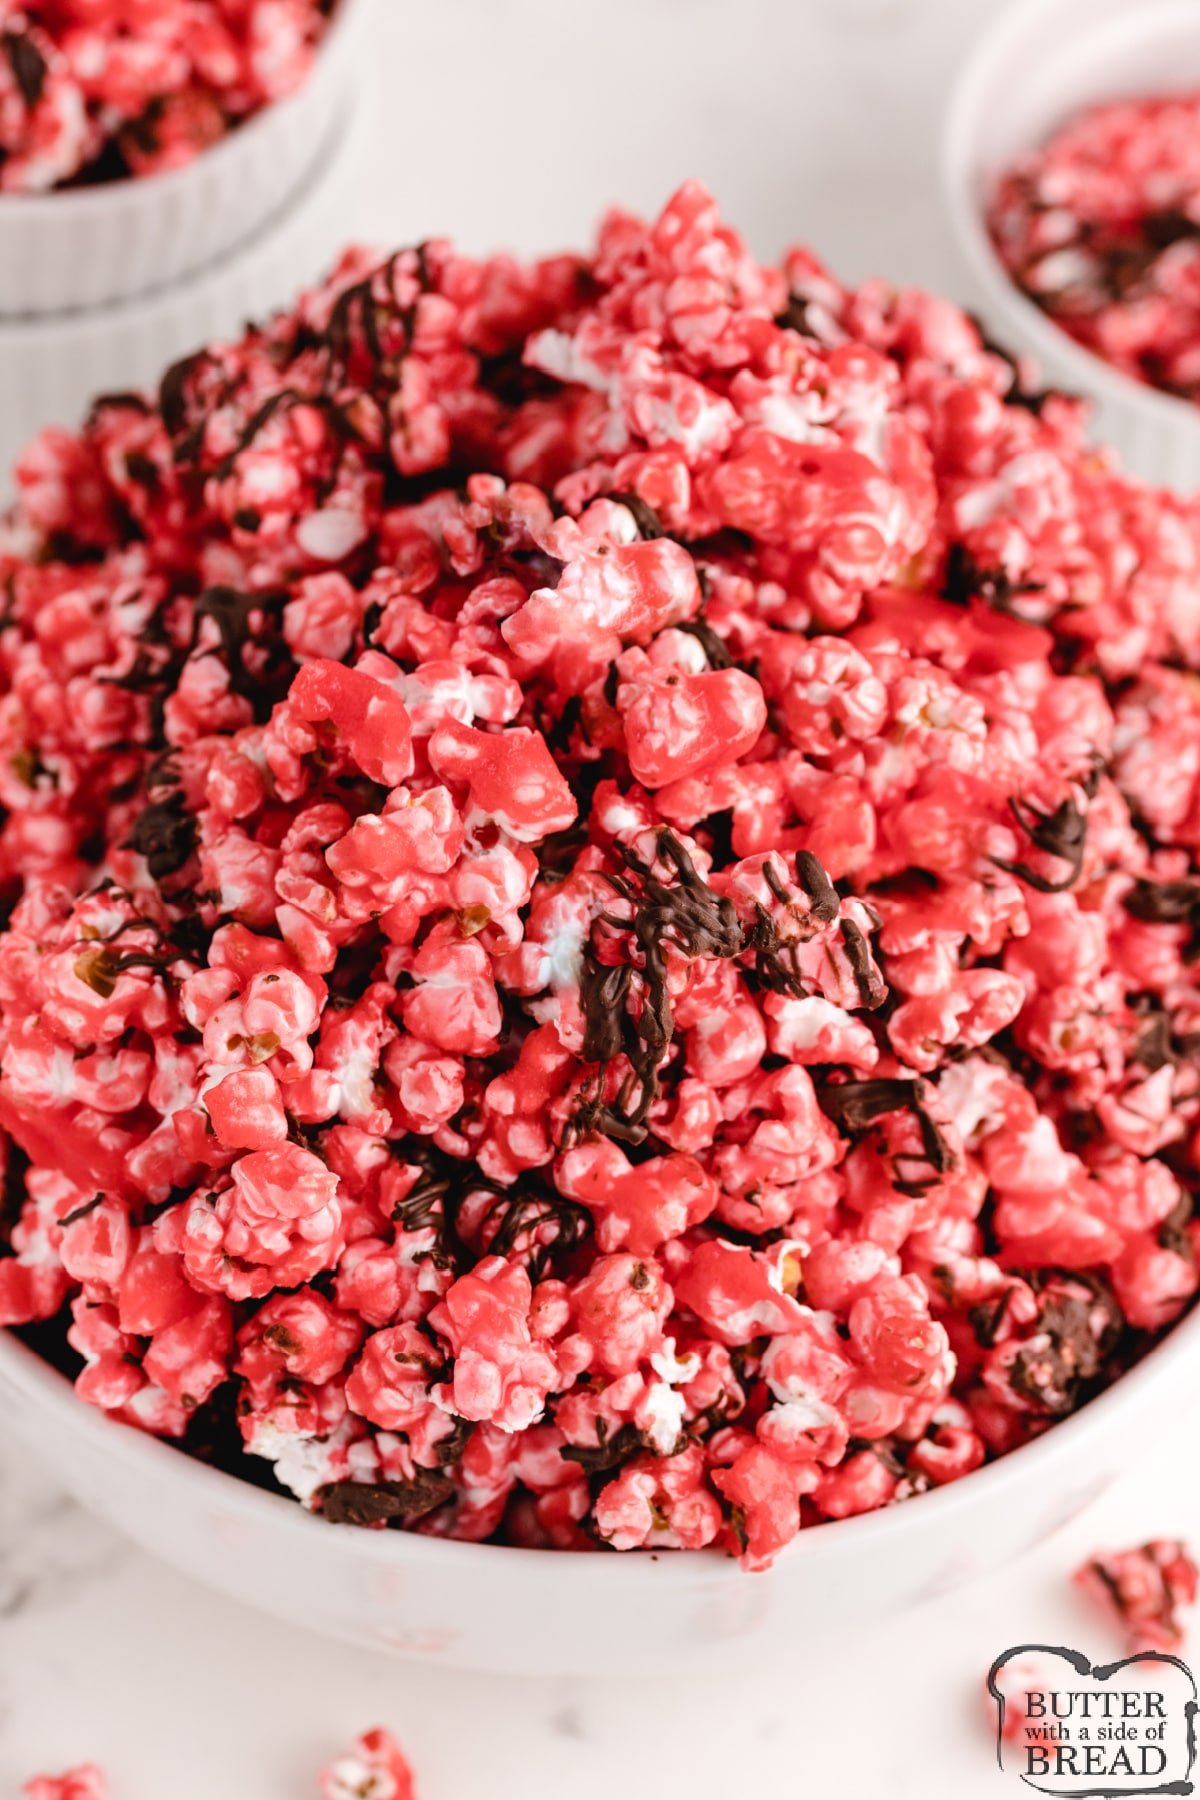 Cherry flavored popcorn made with Kool-Aid and melted chocolate